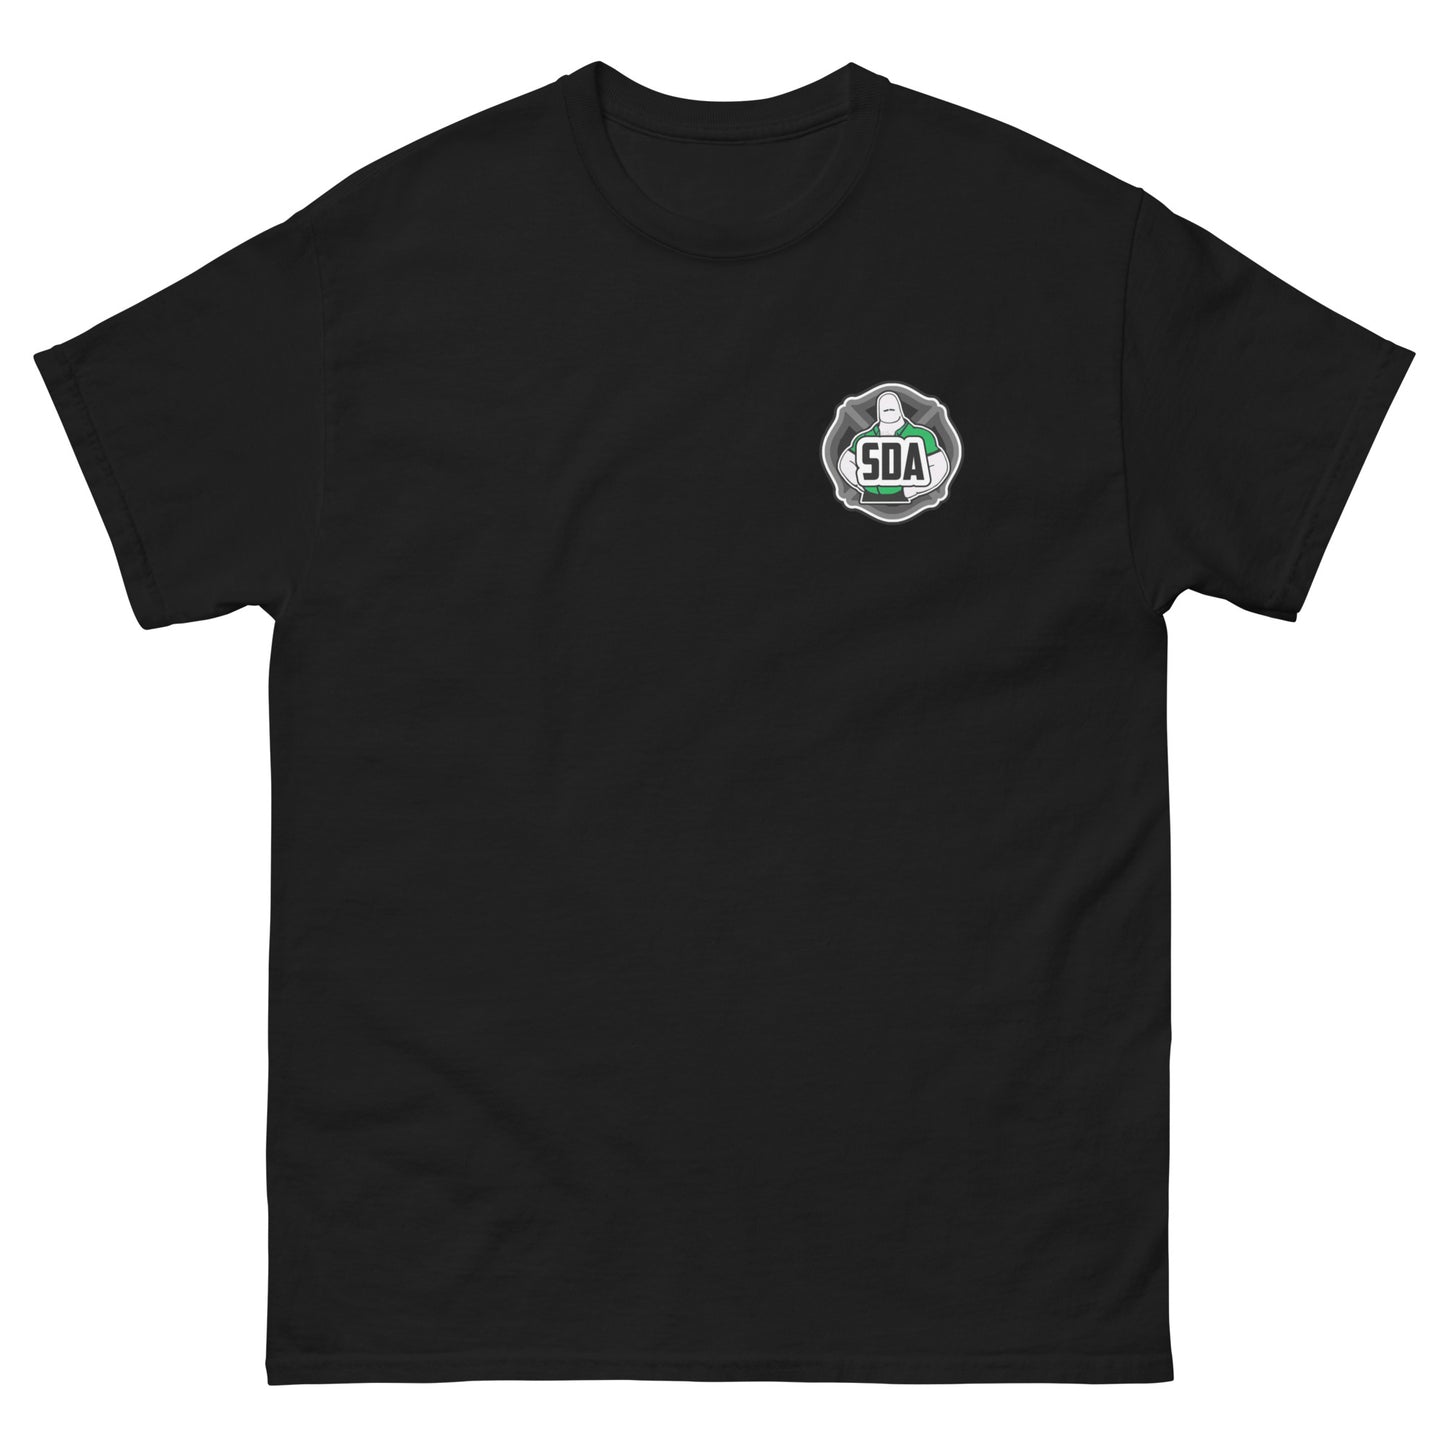 Support local (Maltese version) classic tee